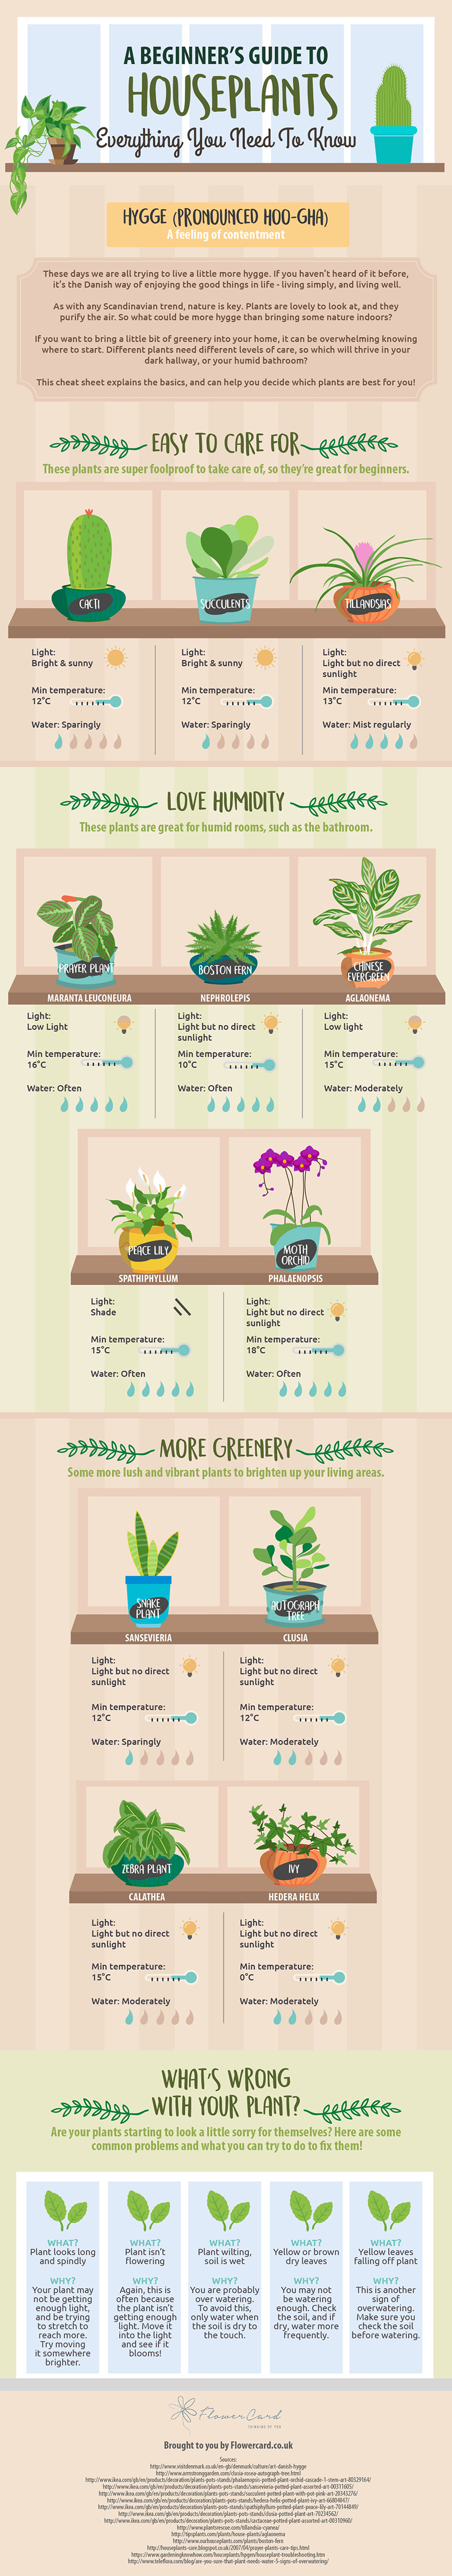 A beginner's guide to houseplants